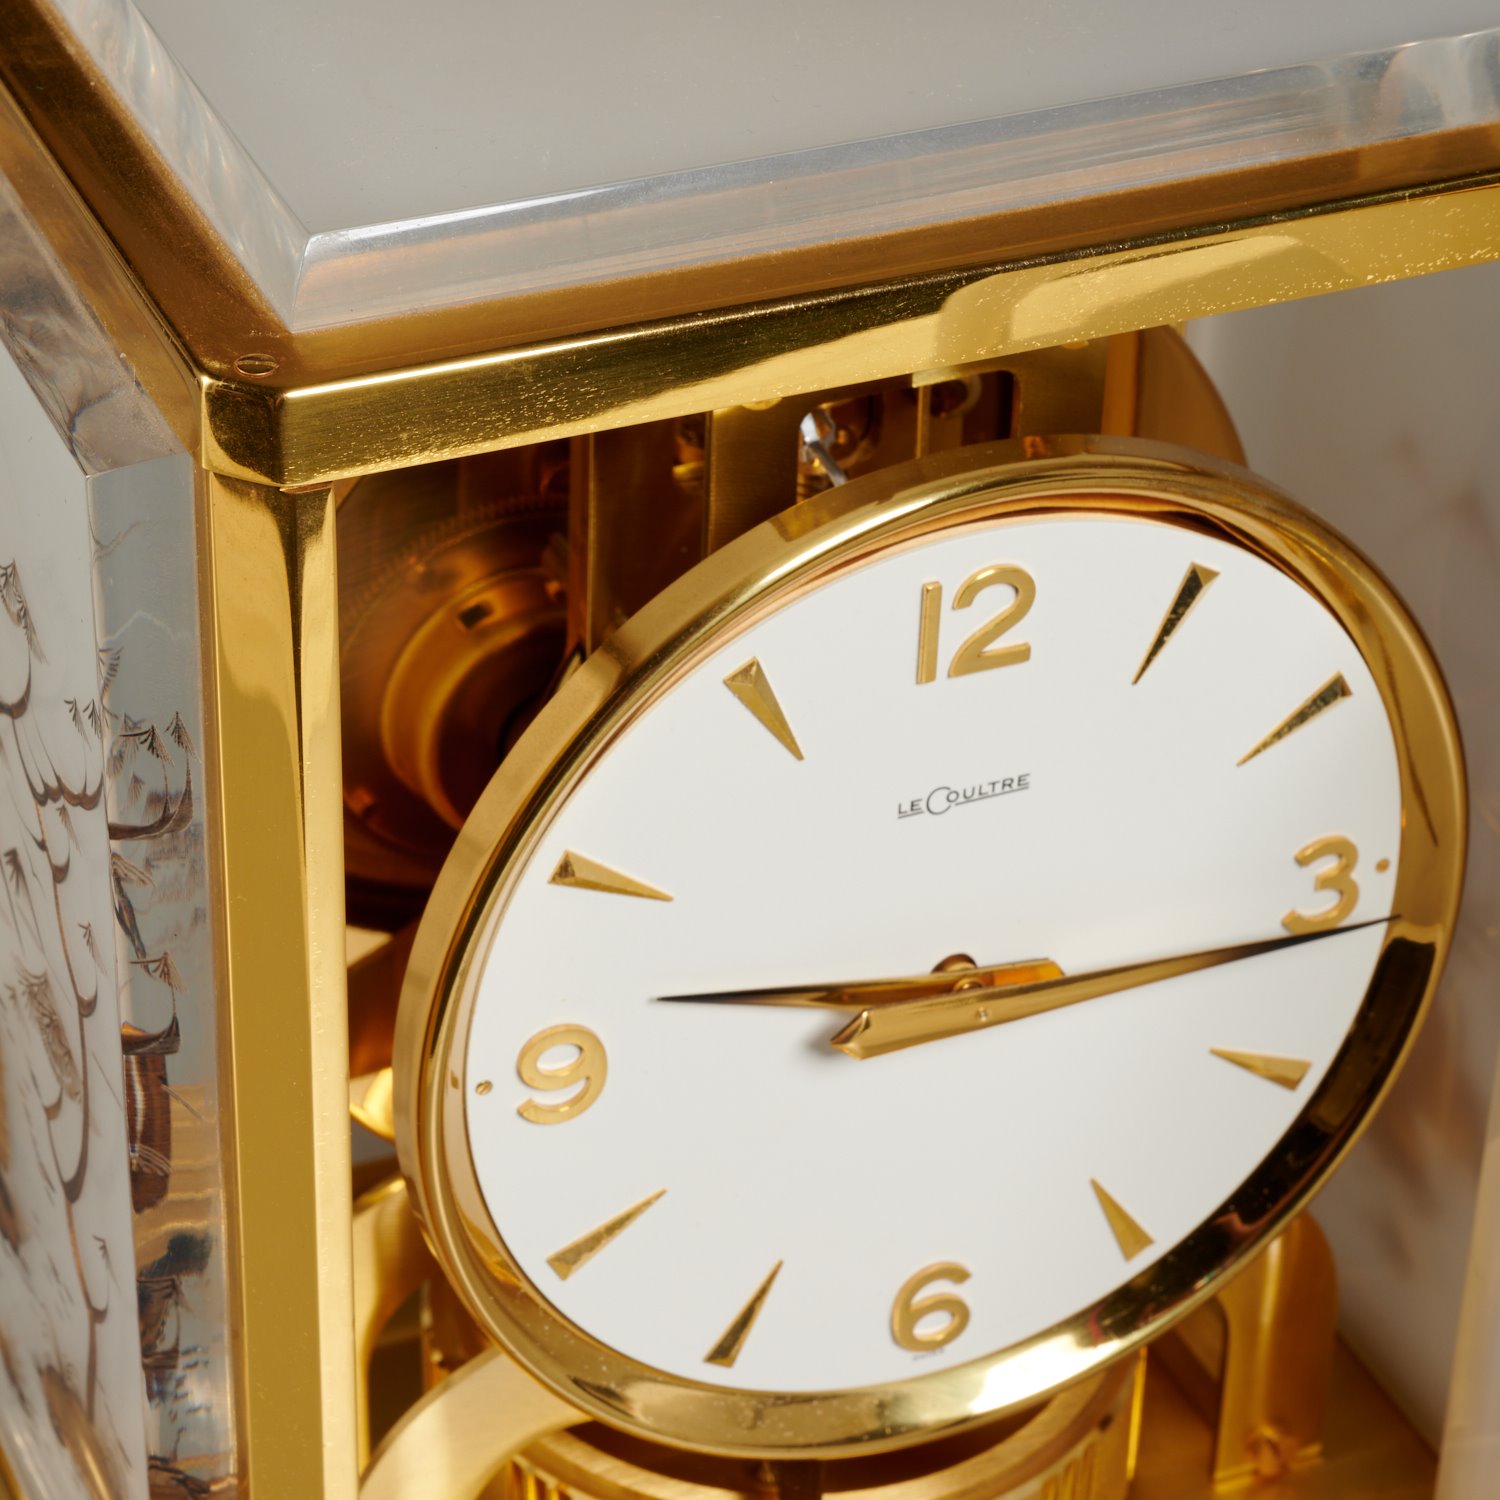 Jaeger-LeCoultre Chinoiserie Atmos Clock - Image 4 of 5